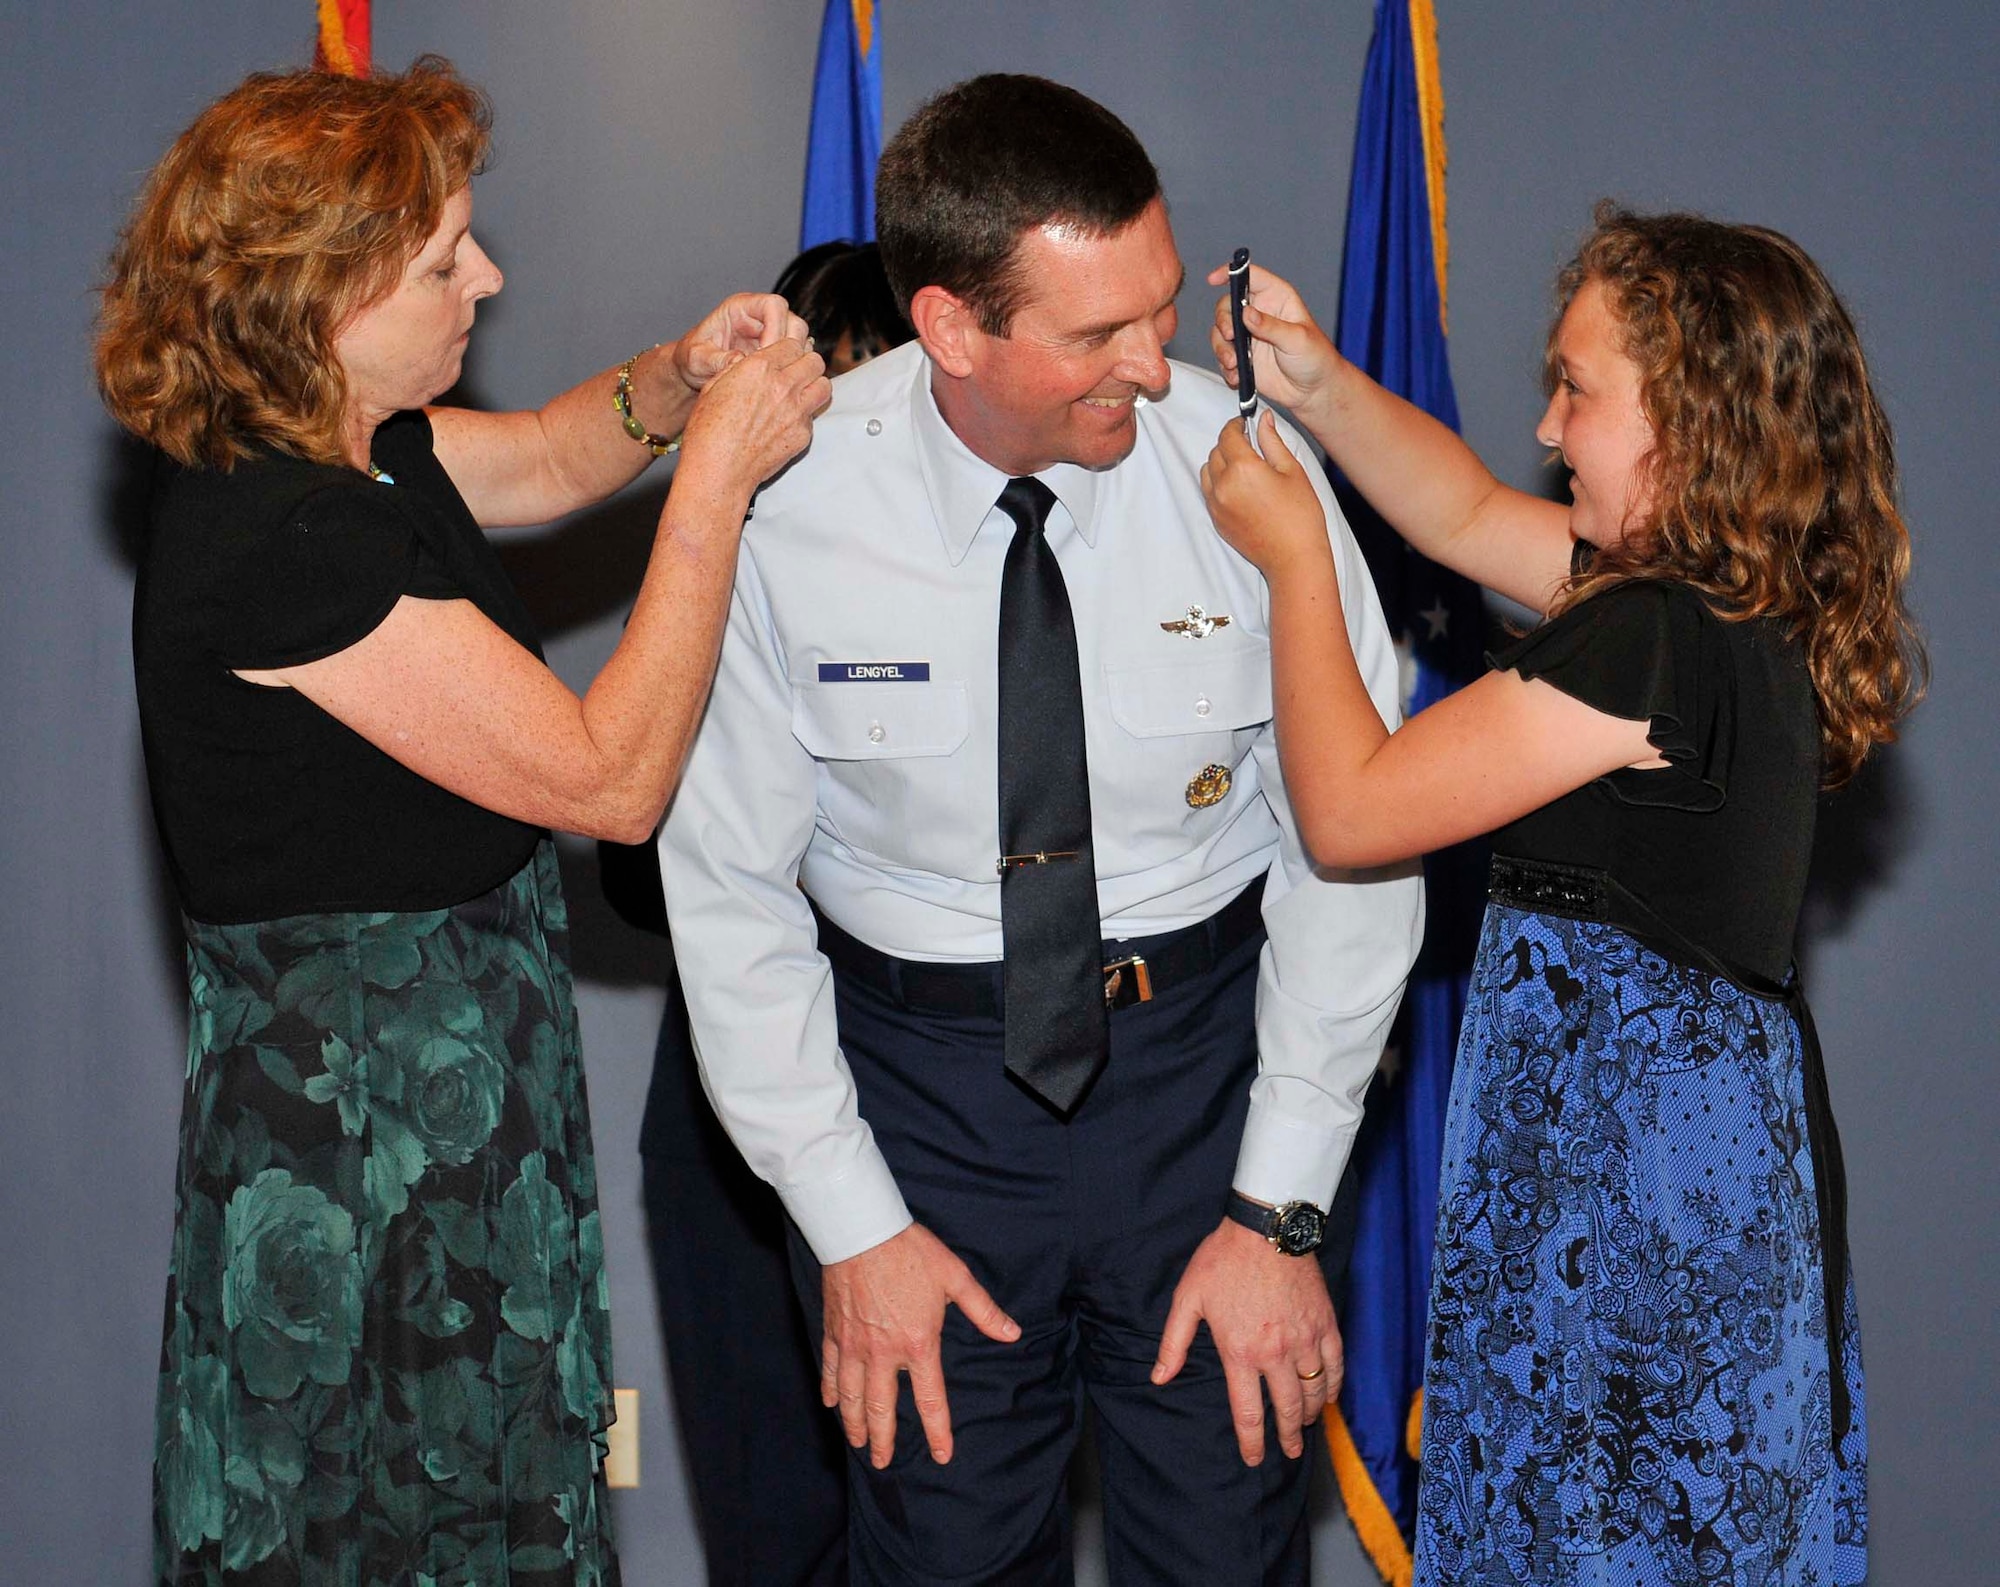 Maj. Gen. Joseph Lengyel smiles at his daughter Katie as she and his wife Sally put on his new epaulets during his promotion ceremony at Tyndall Air Force Base, Fla., April 1. General Lengyel is the 1st Air Force (Air Forces Northern) vice commander. (U.S. Air Force photo by Lisa Norman)